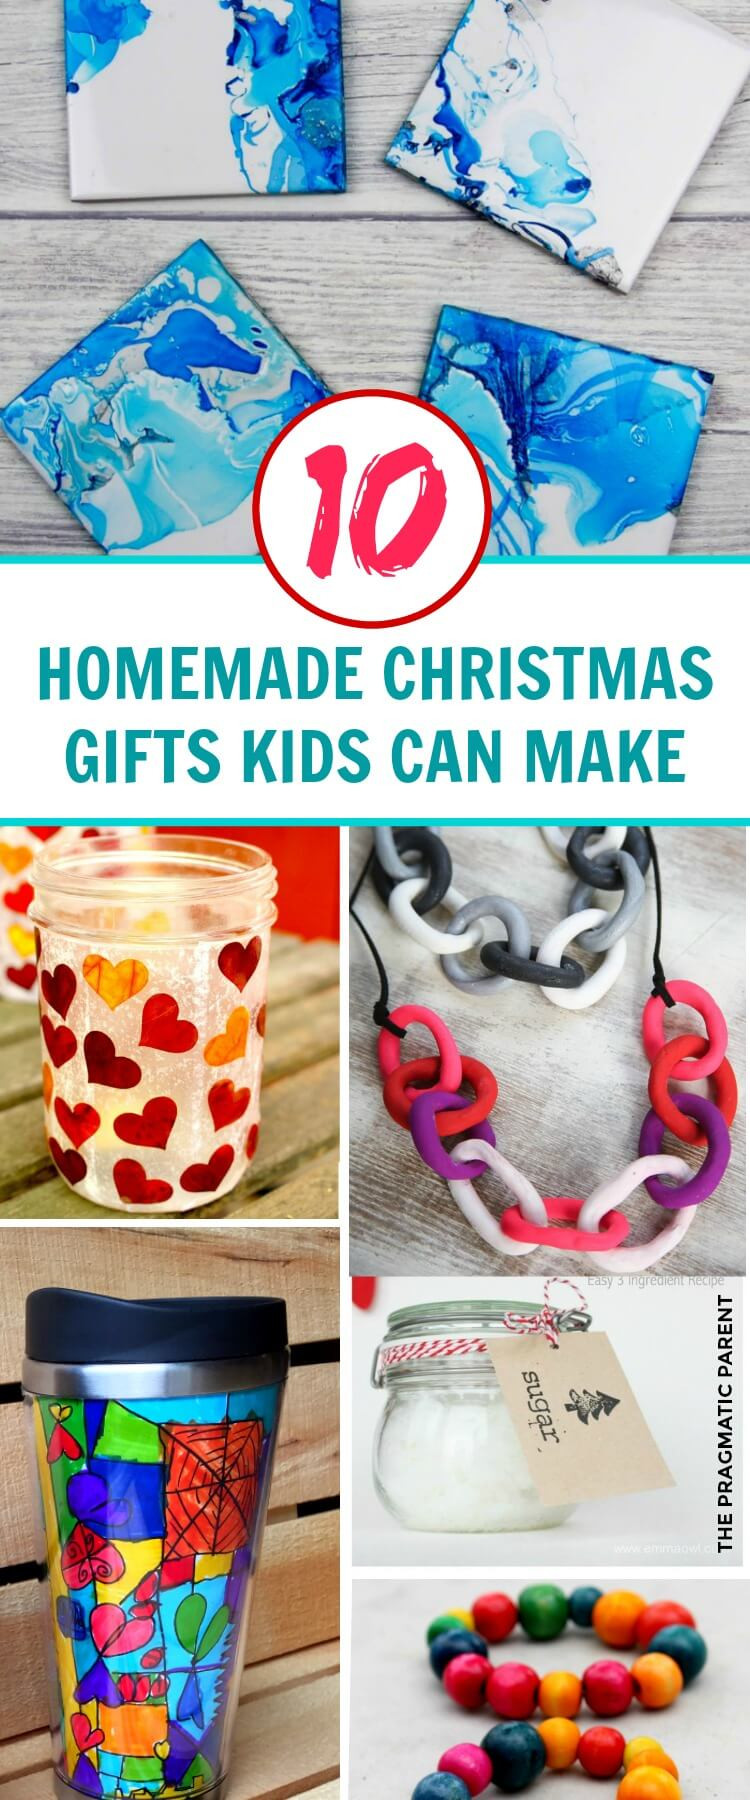 DIY Gifts For Toddlers
 10 Beautiful Homemade Christmas Gifts Kids Can Make